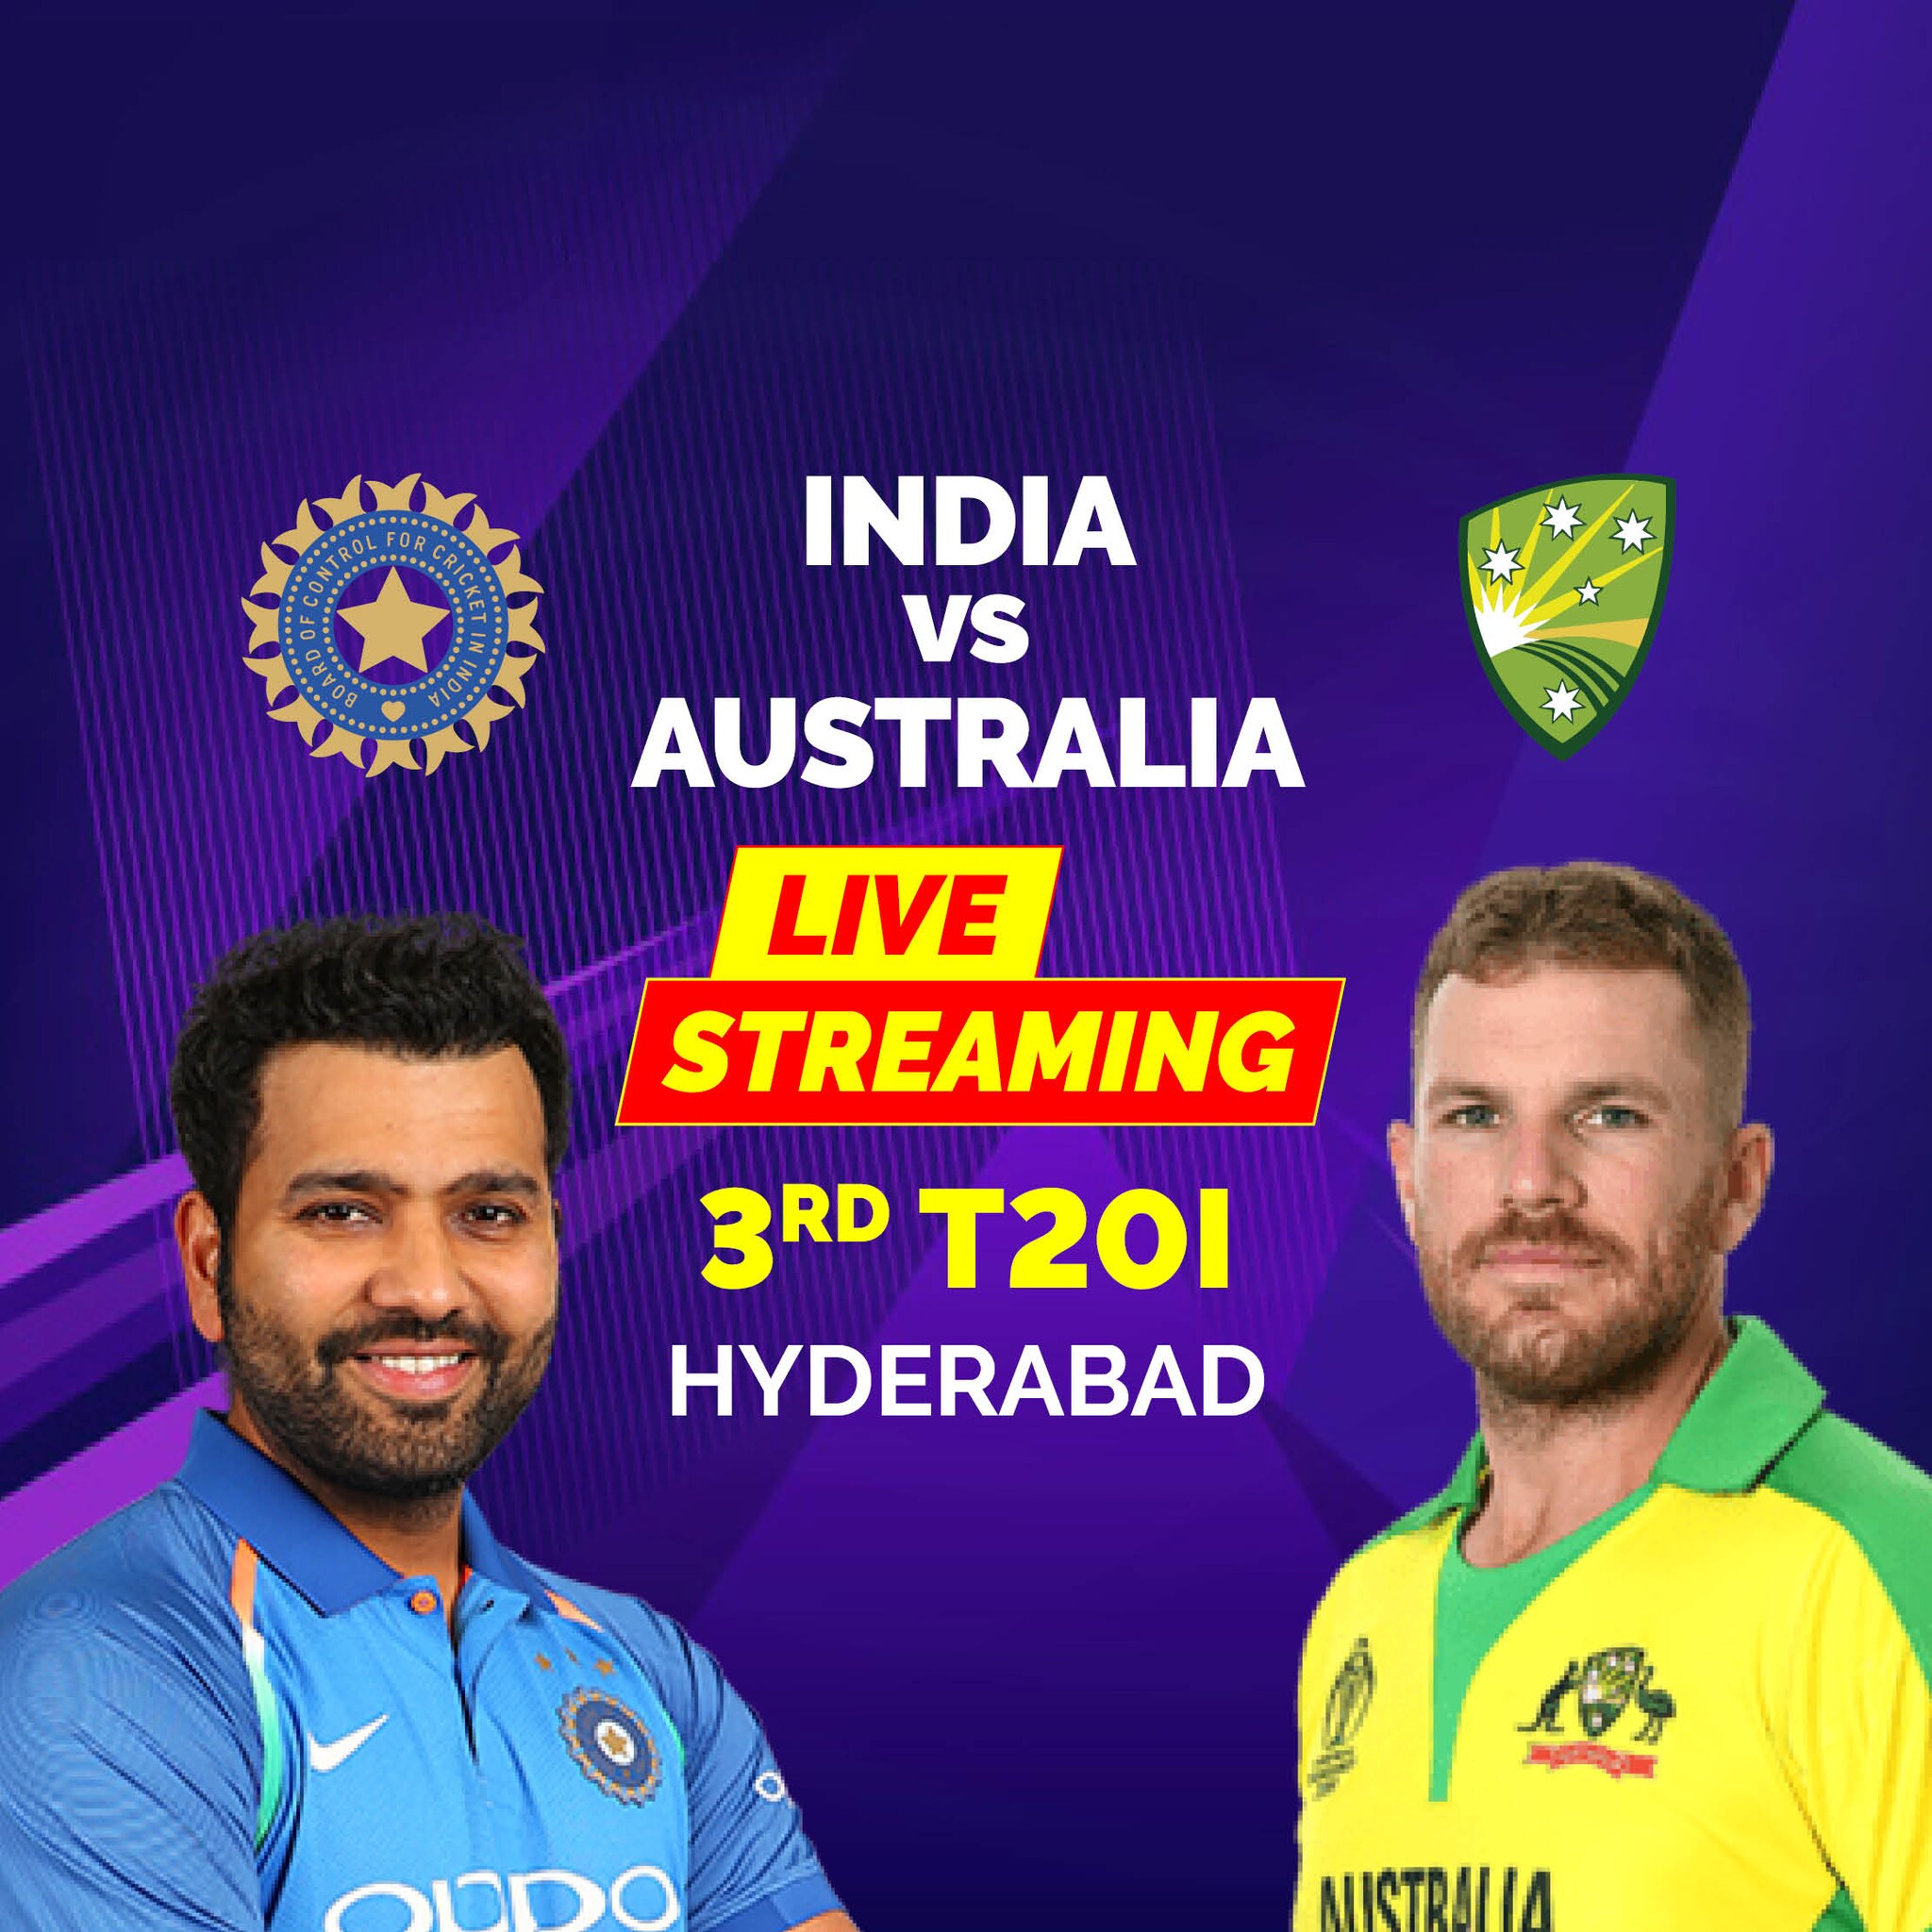 IND vs AUS 3rd T20I Live Cricket Streaming How to Watch India vs Australia 2022 Series Coverage on TV And Online